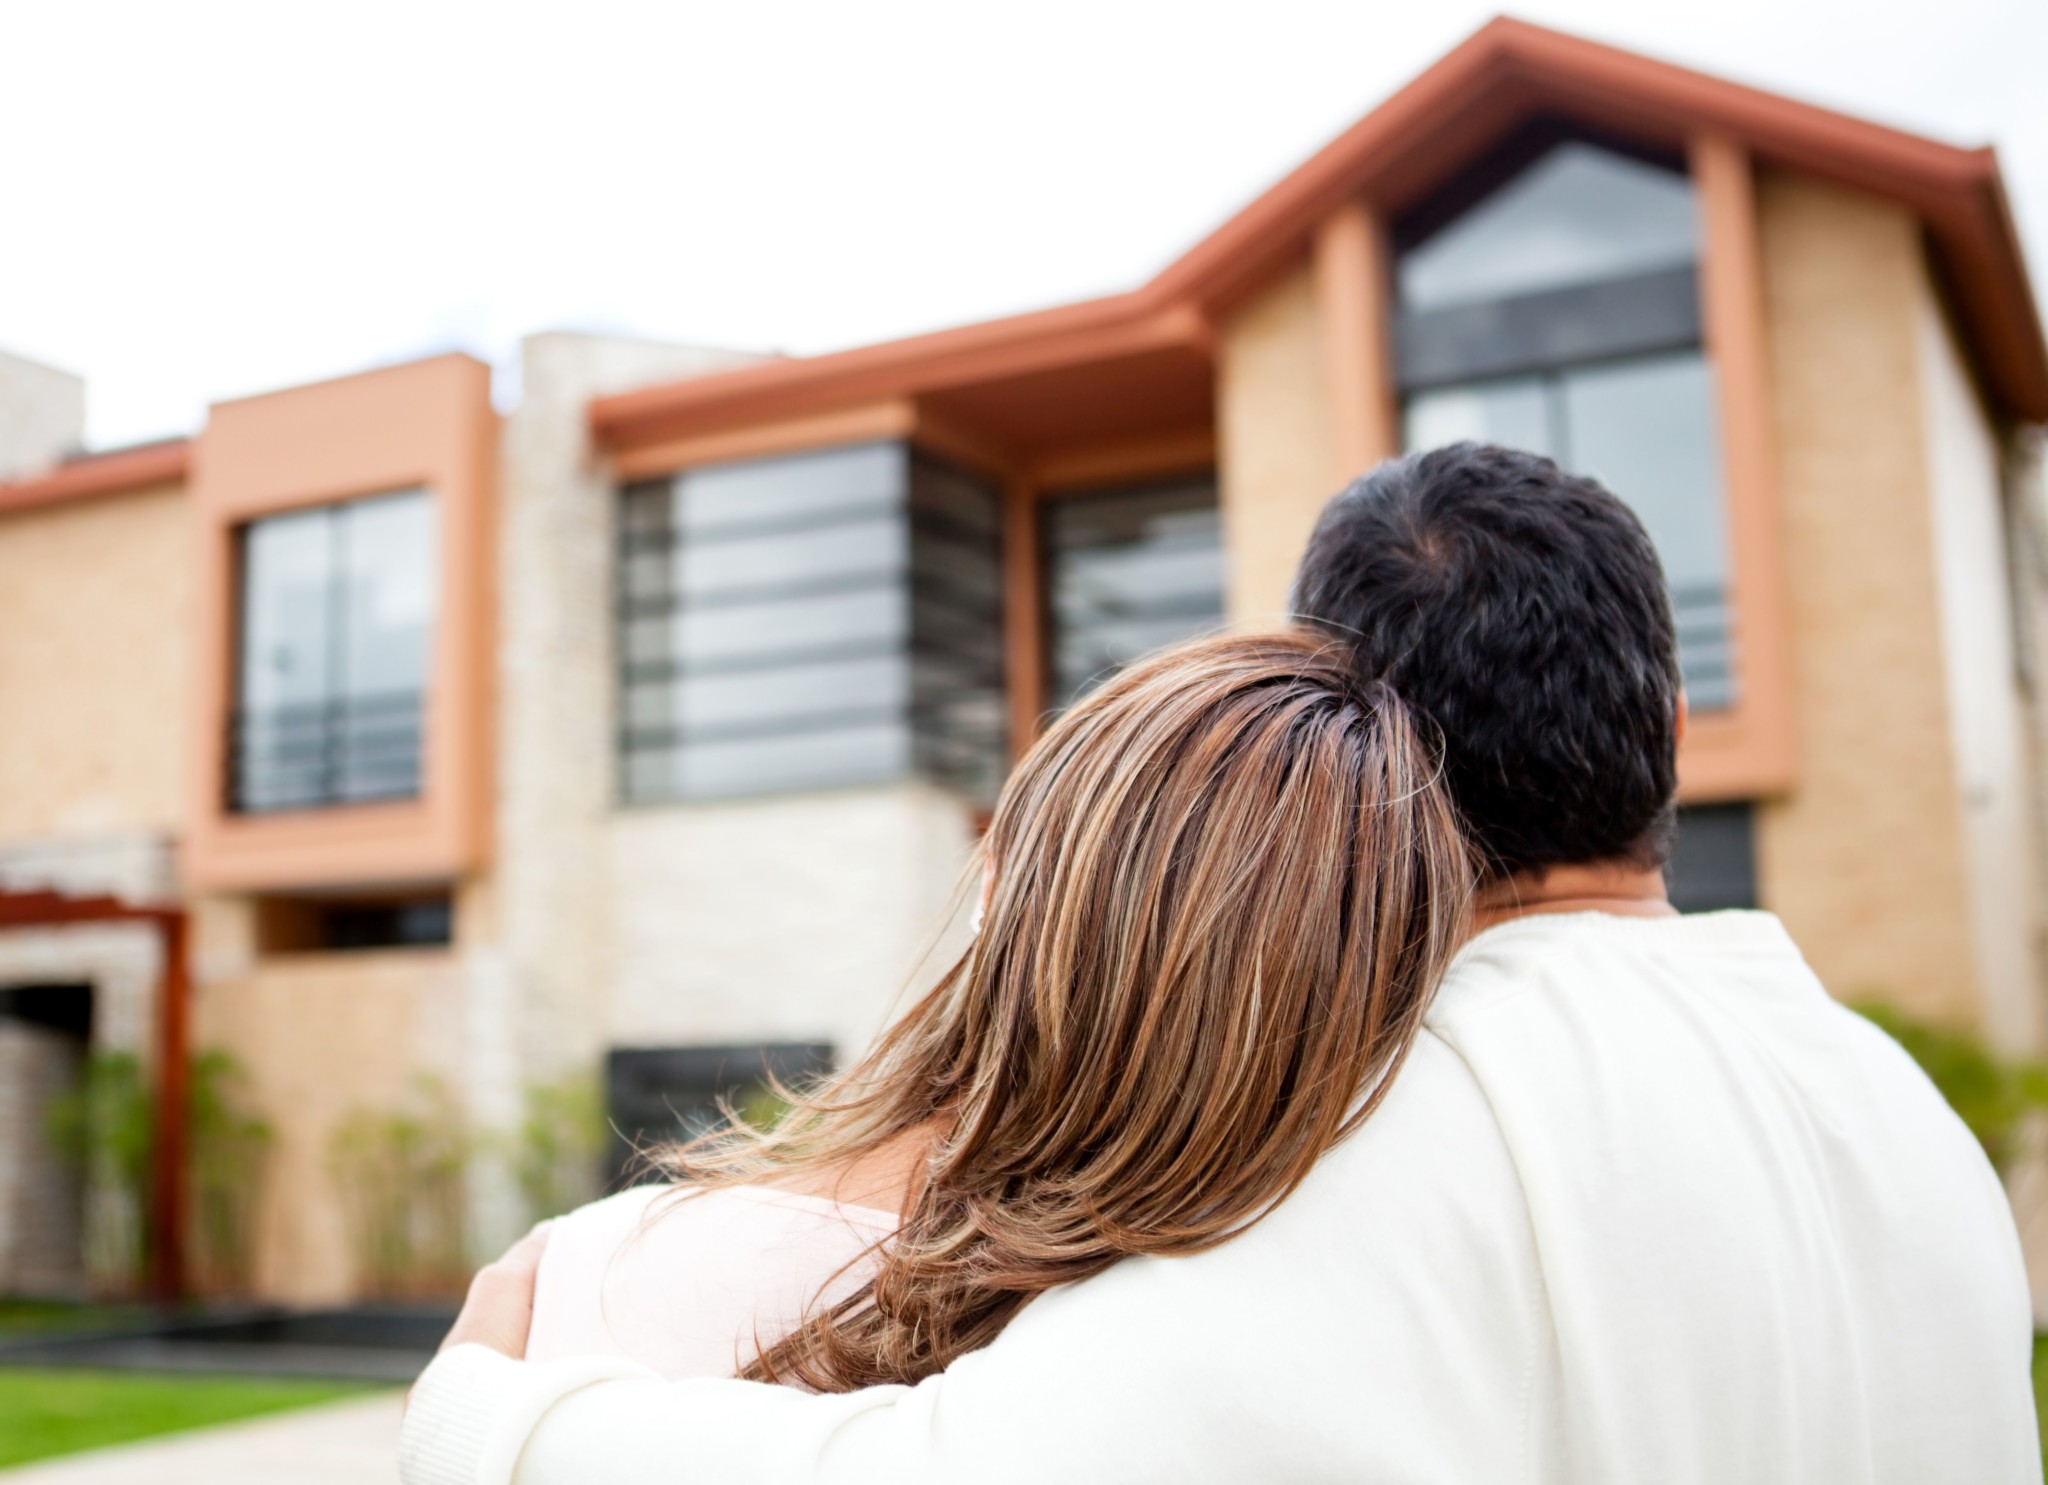 buying an investment property checklist